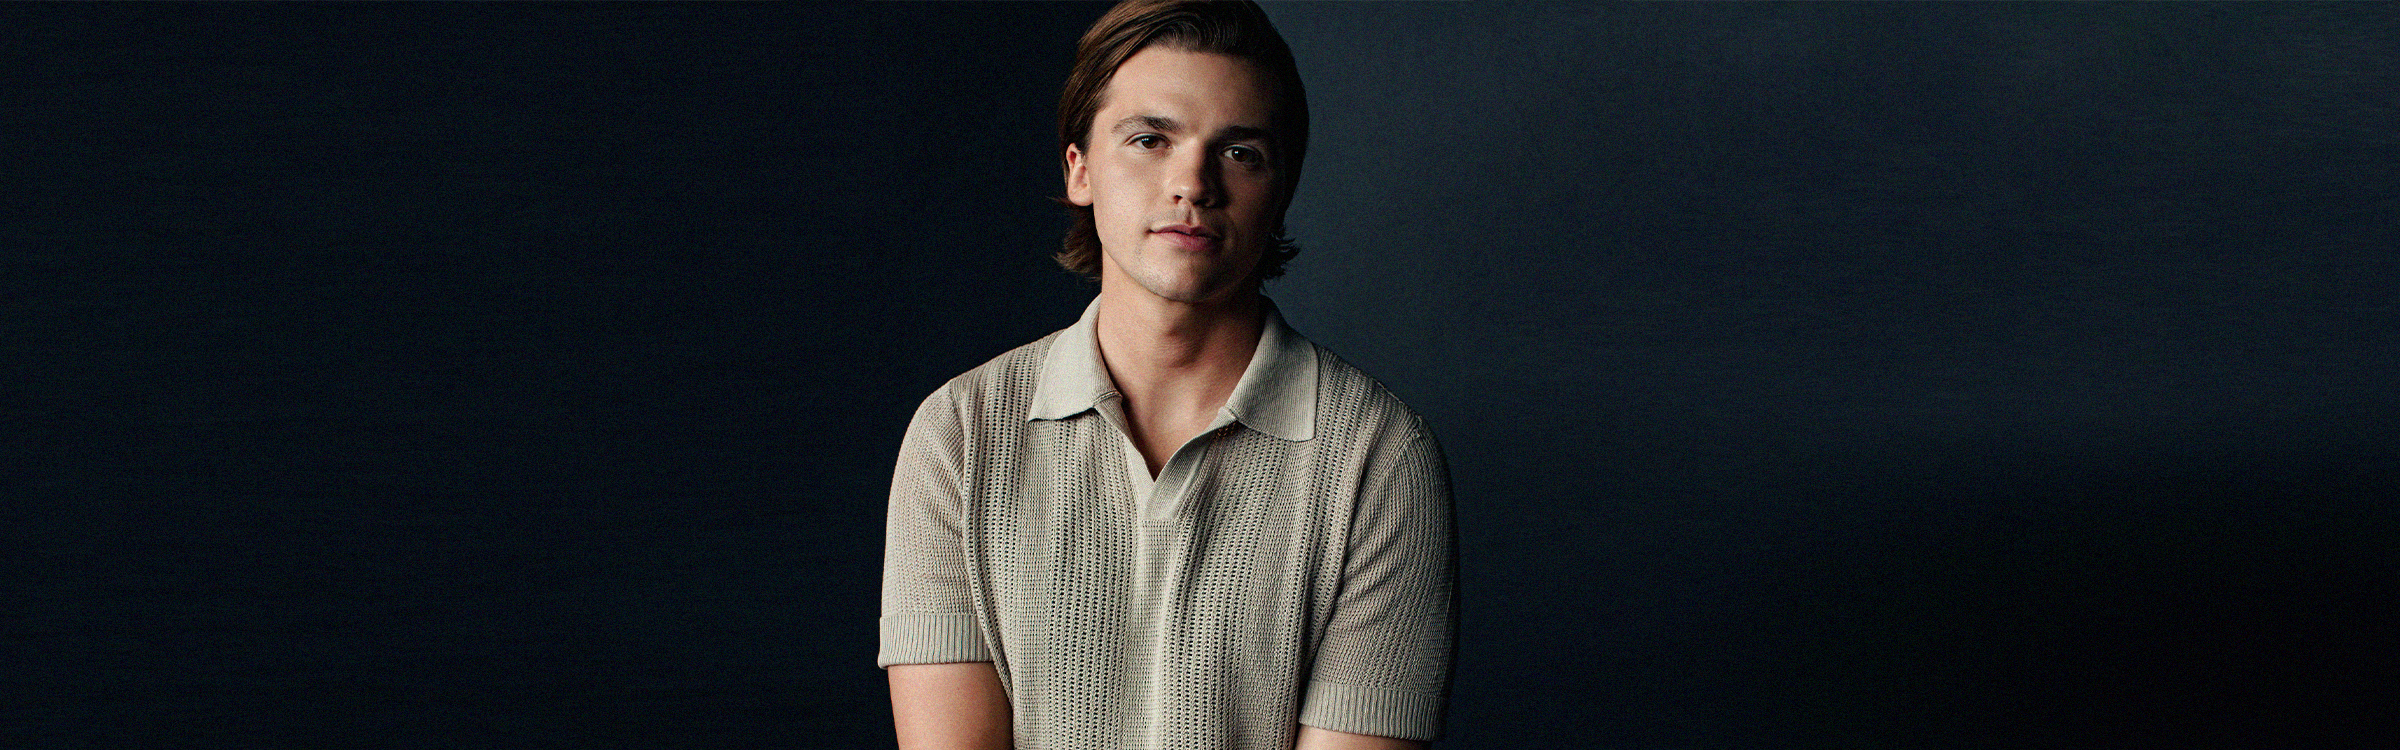 Joel Courtney Bids Adieu to The Kissing Booth